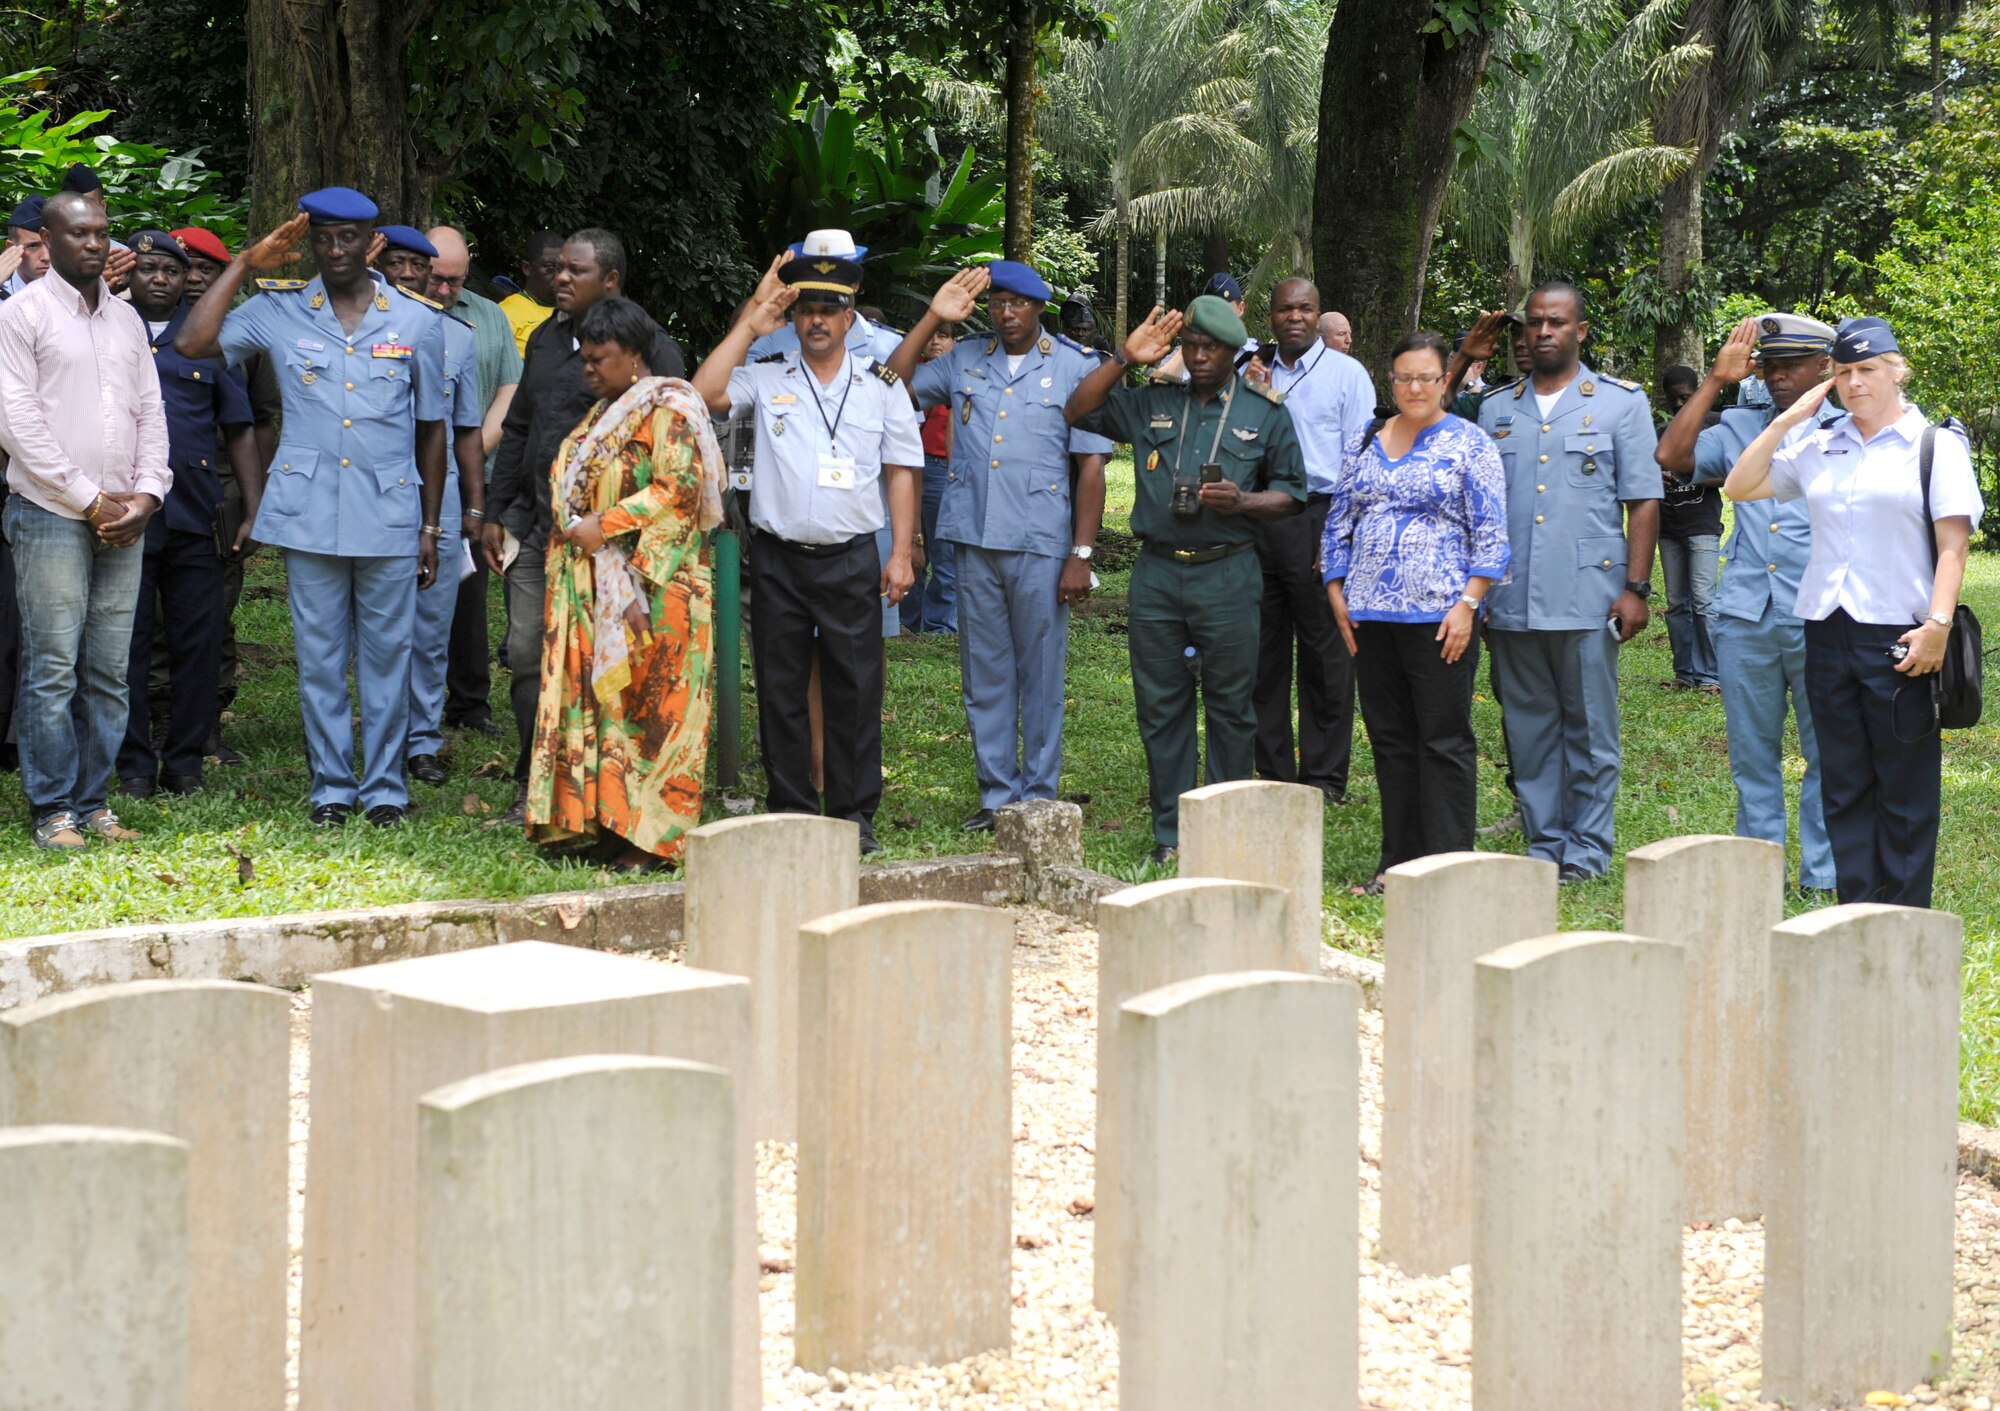 The African Air Chiefs visit the Limbe Botanic Garden cemetery for the honored soldiers of the Nigerian Regiment of 1914-1942. The Air Chiefs took time to pay their respect. “When you go home tell them of us and say for your tomorrows these gave their today” John Maxwell Edmonds 1875-1958. (U.S. Air Force photo by Tech Sgt. Patrick Mitchell)